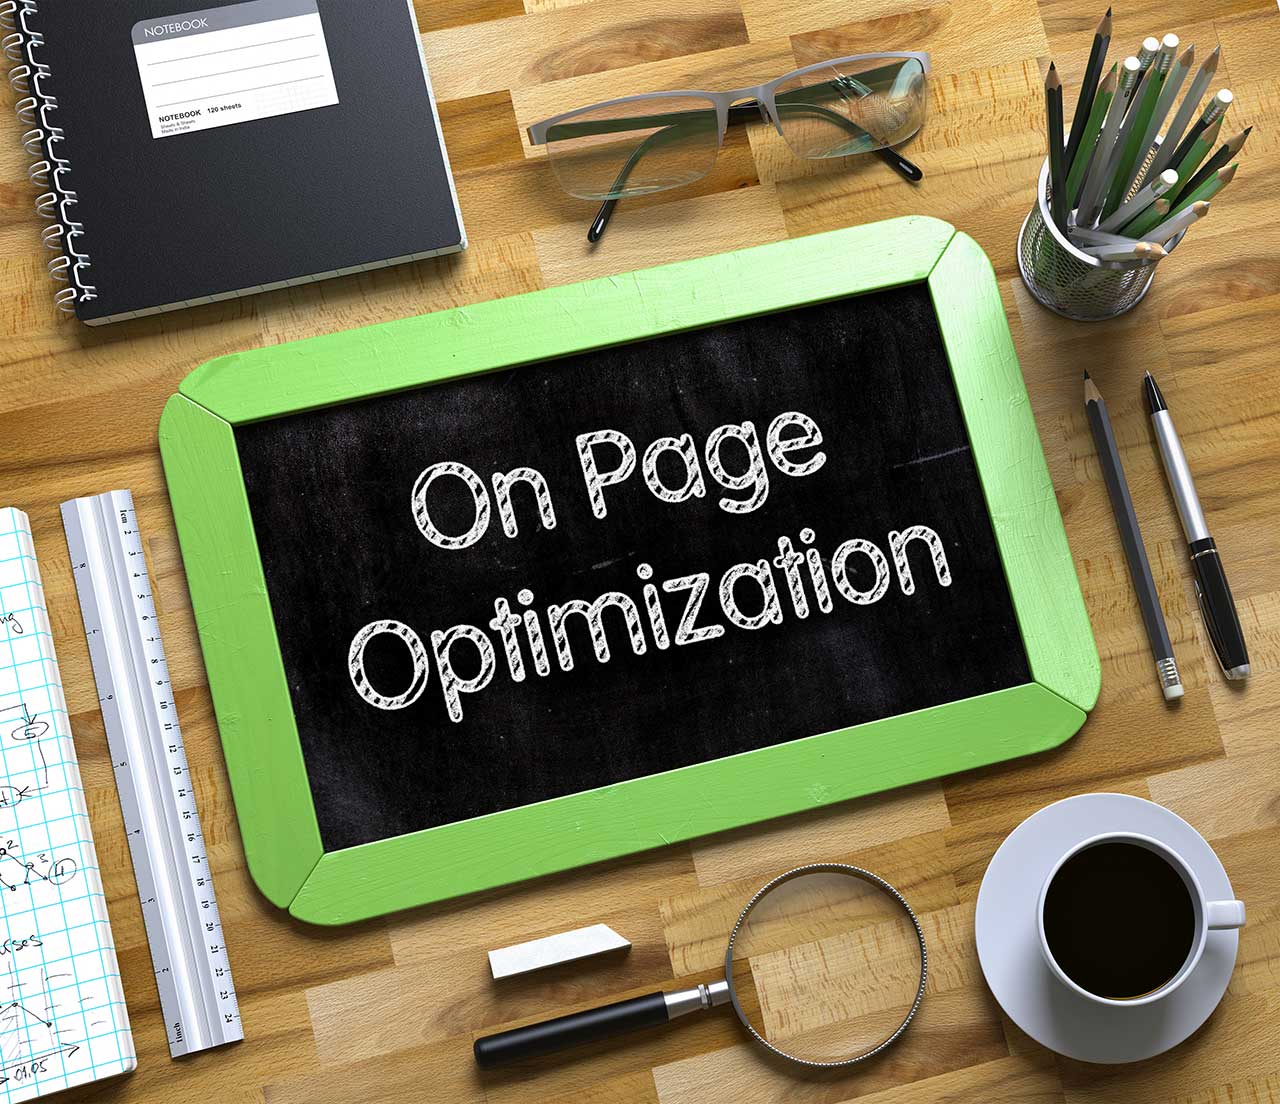 on-page search engine optimisation